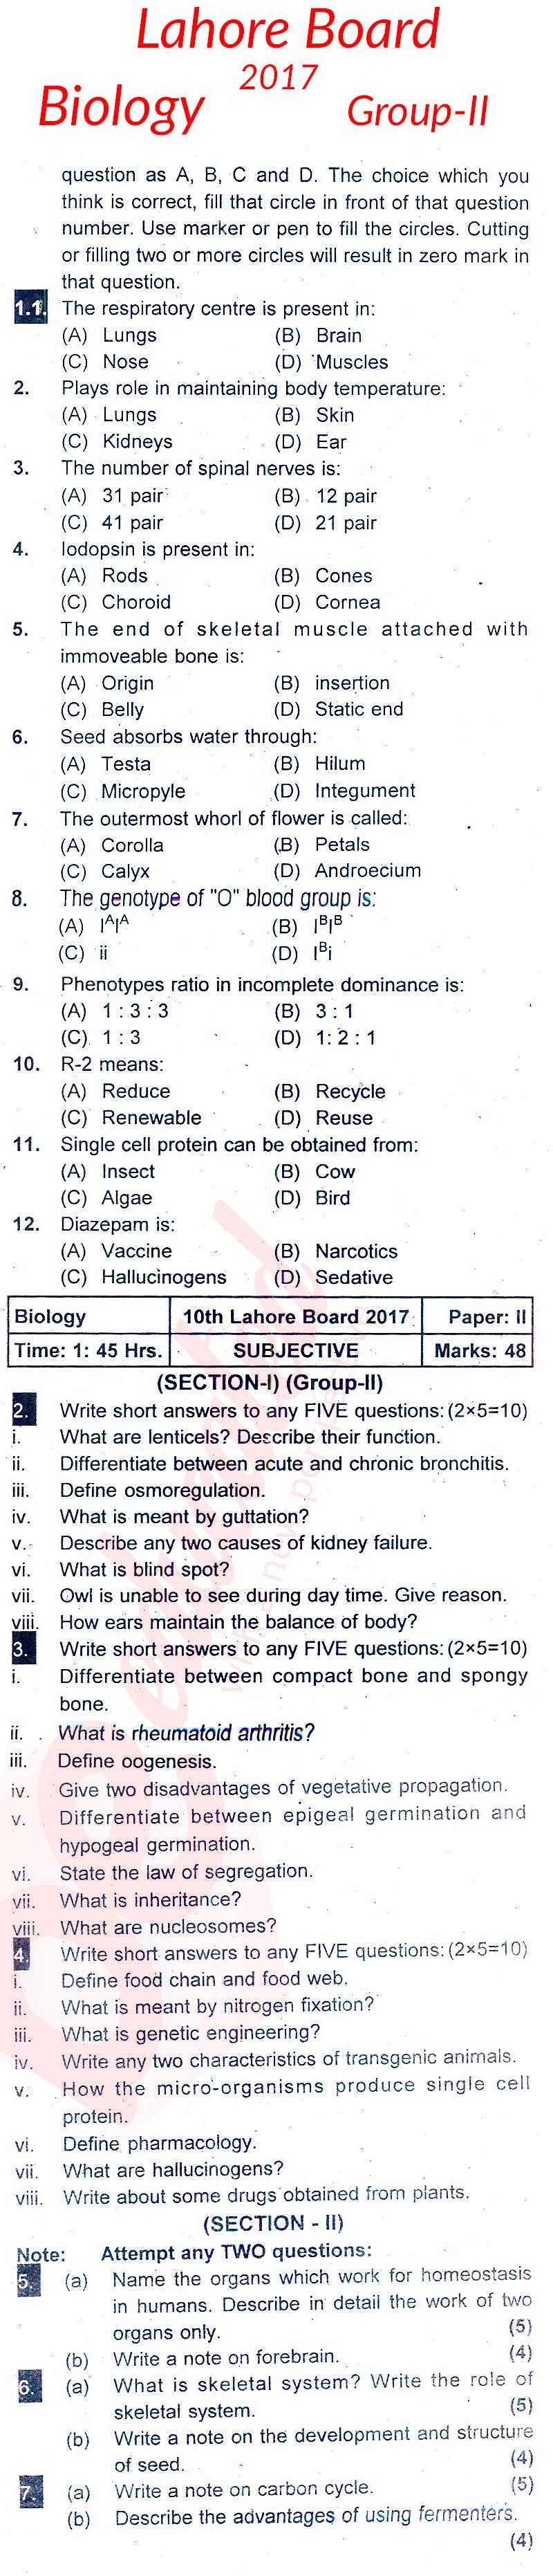 Biology 10th class Past Paper Group 2 BISE Lahore 2017